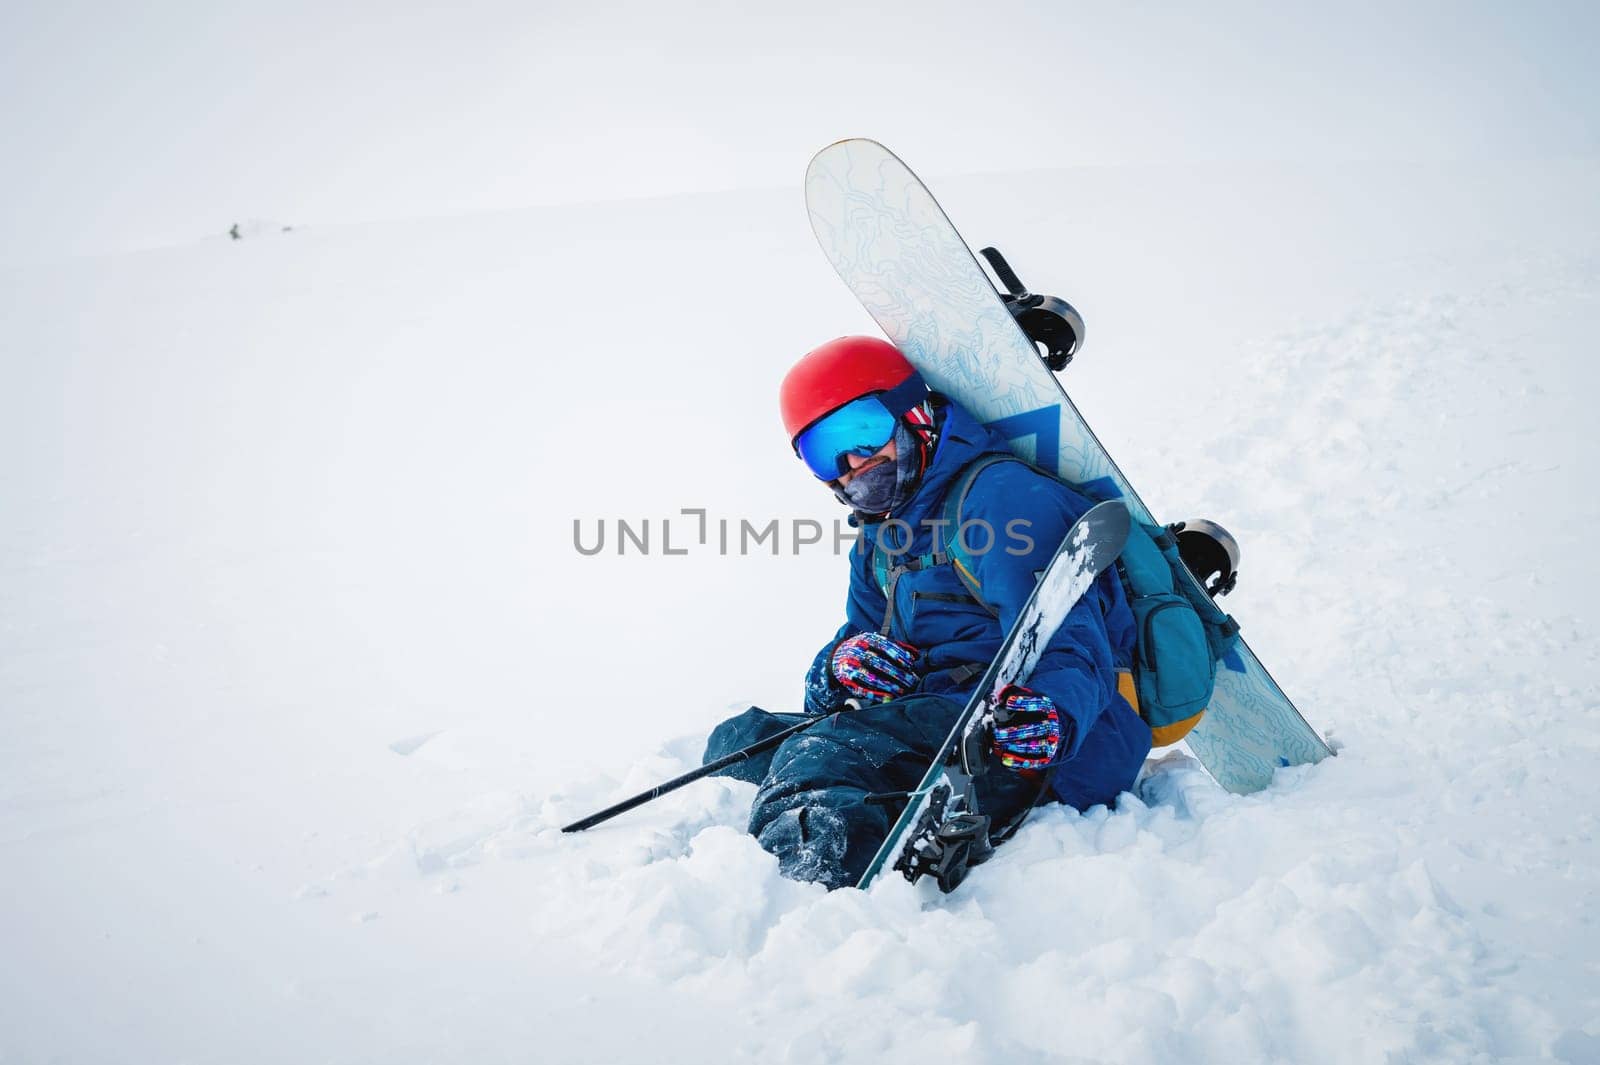 man with ski equipment and a snowboard is sitting a snowy mountain. Blue sky and snowy mountain in the background. by yanik88